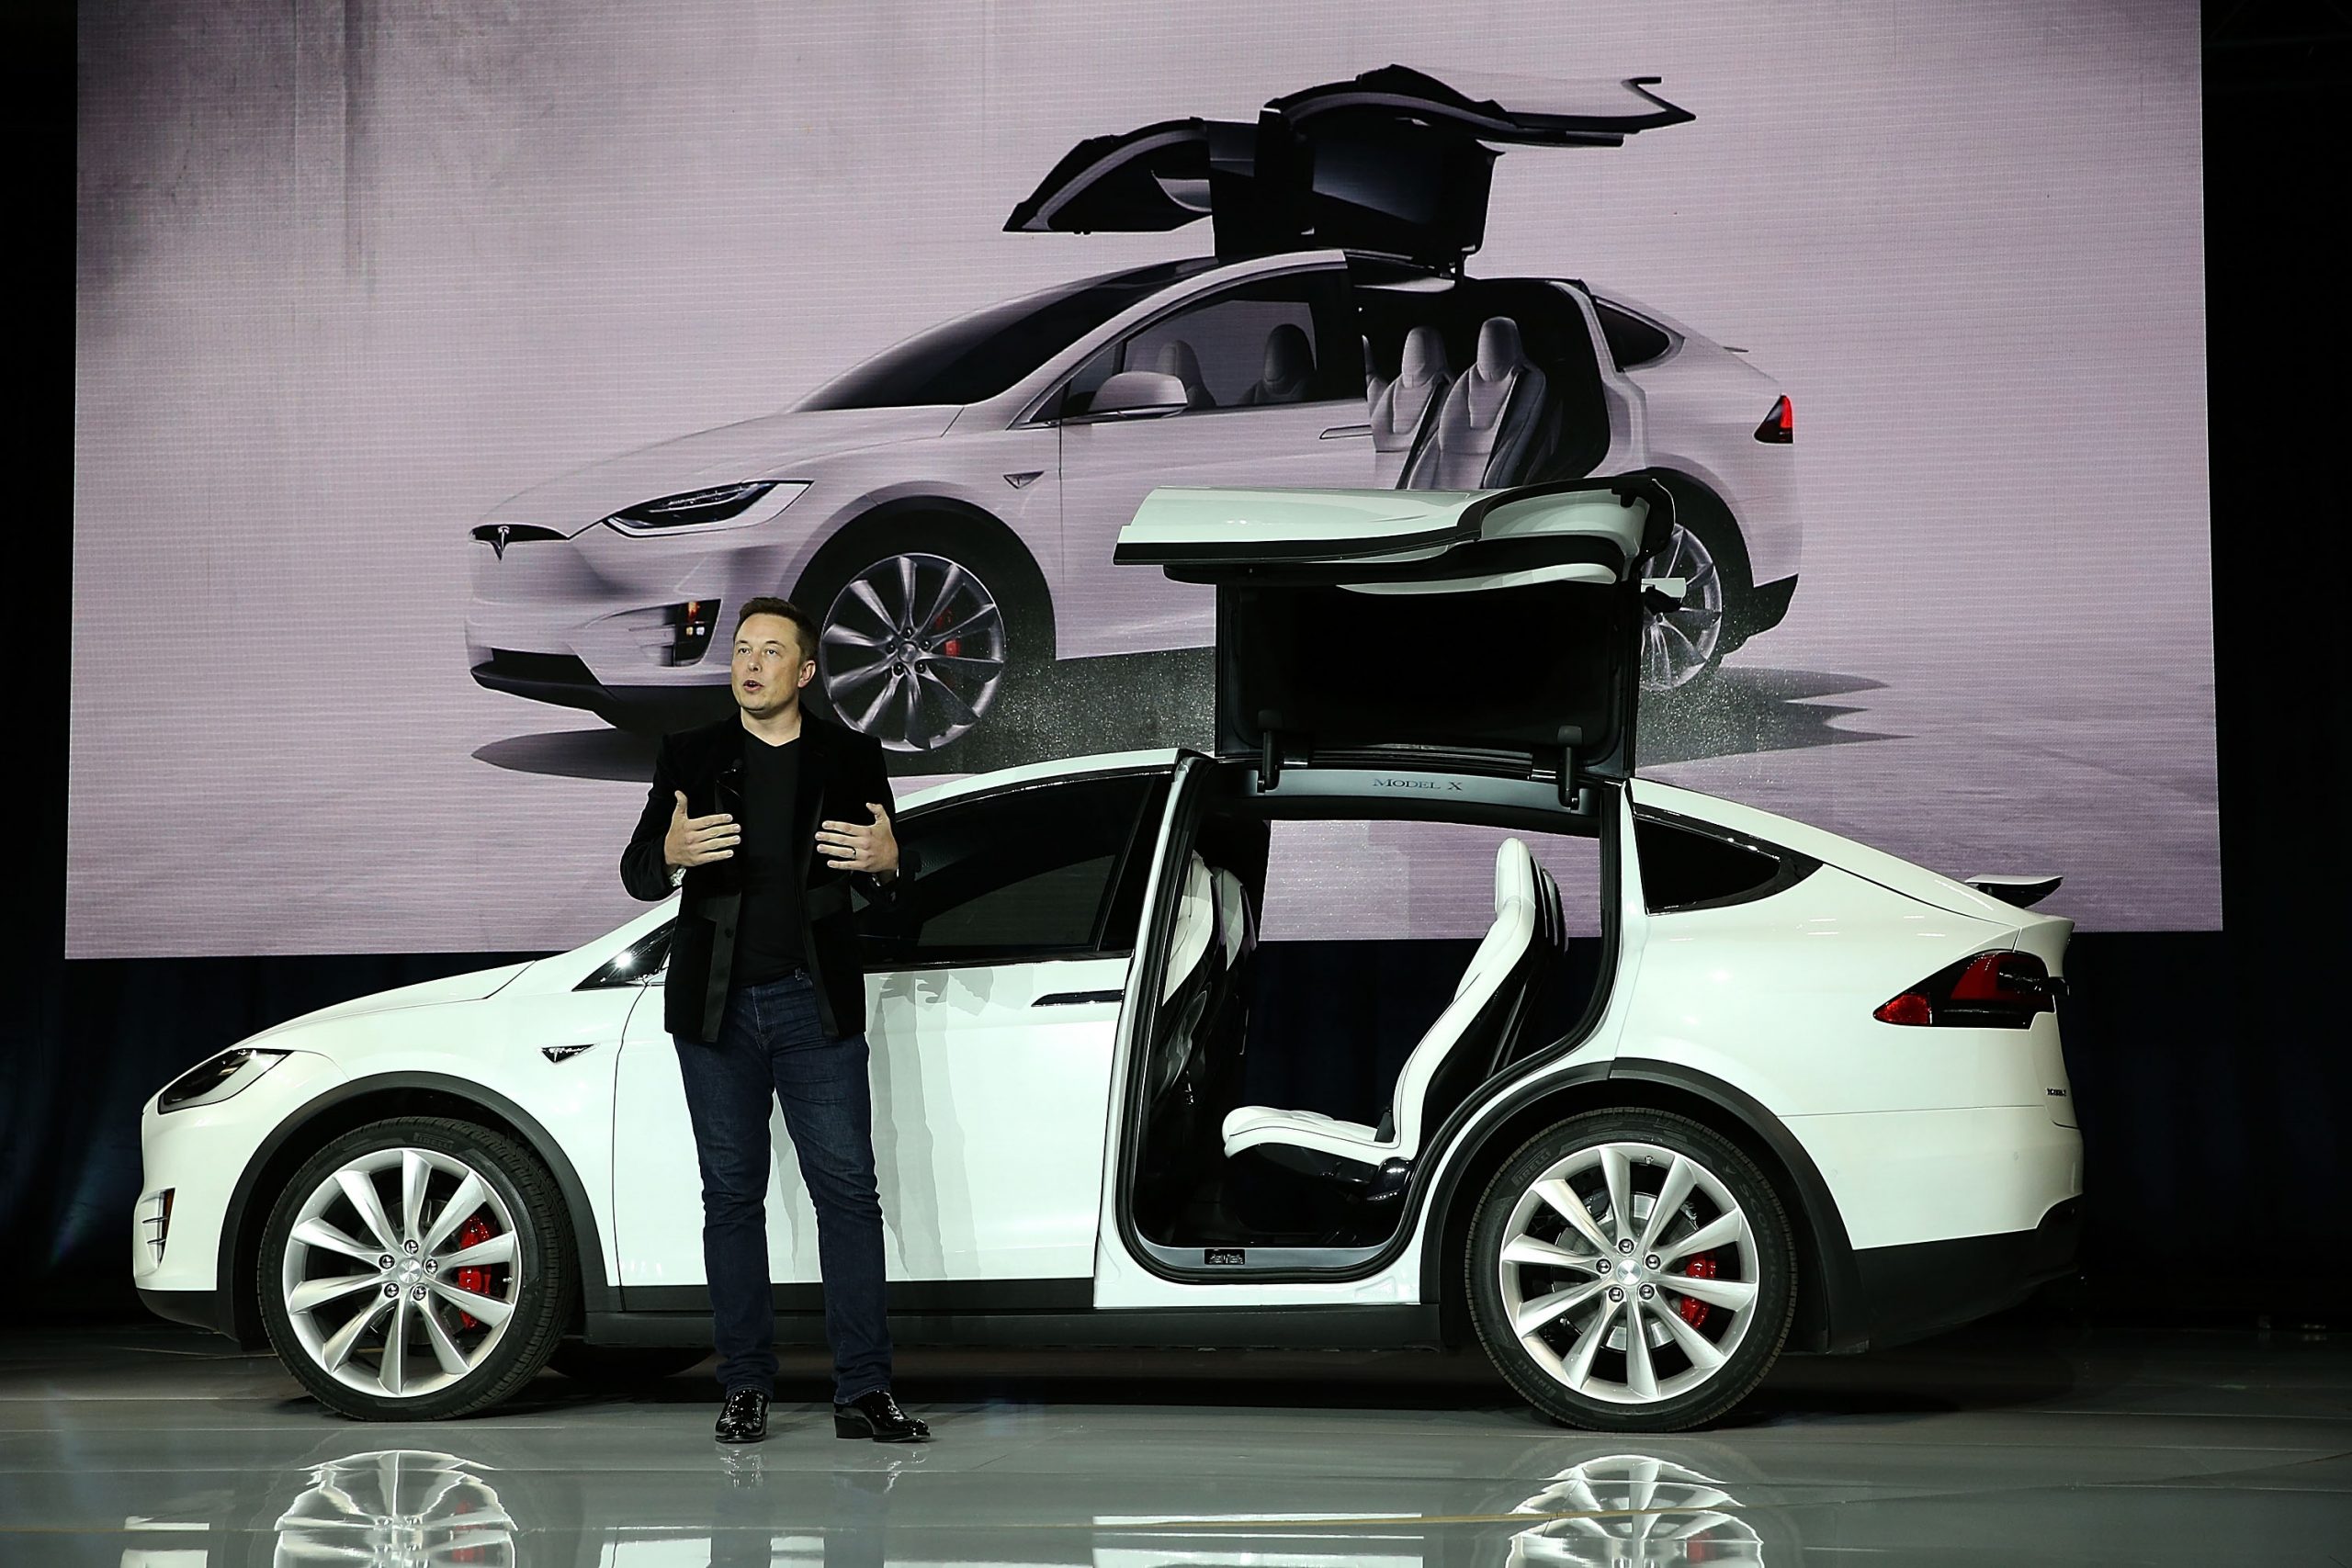 Elon Musk stands outside of a Tesla crossover vehicle.